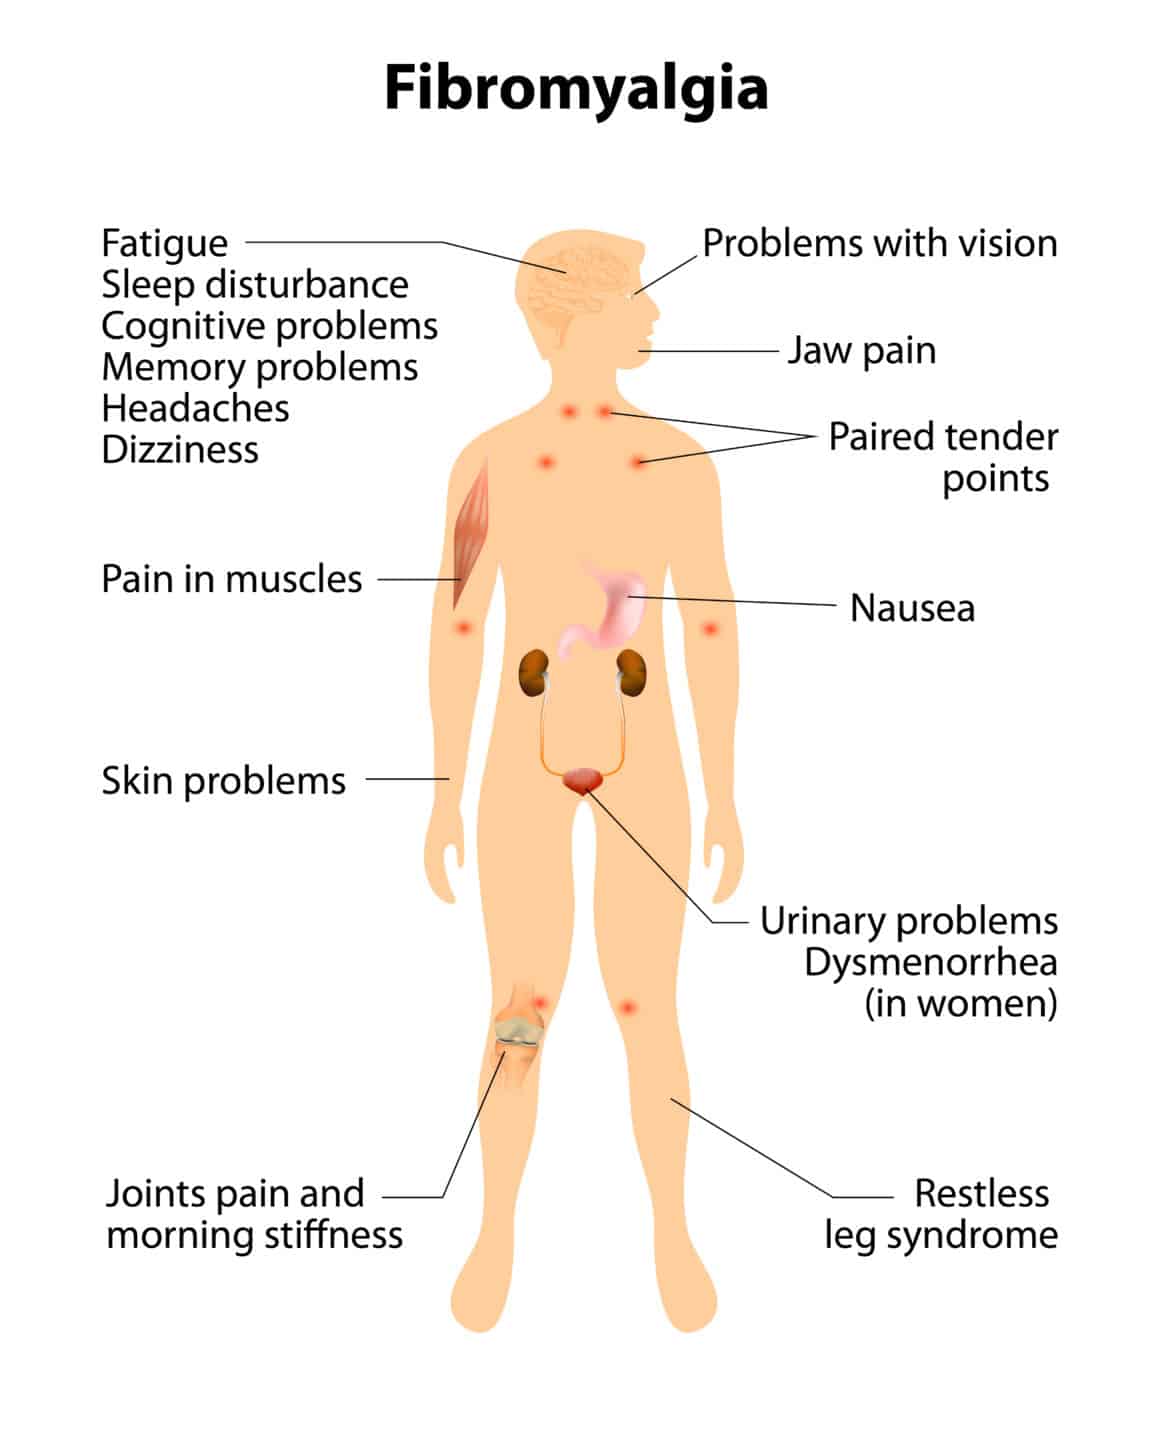 signs and symptoms of fibromyalgia. Human silhouette with internal organs